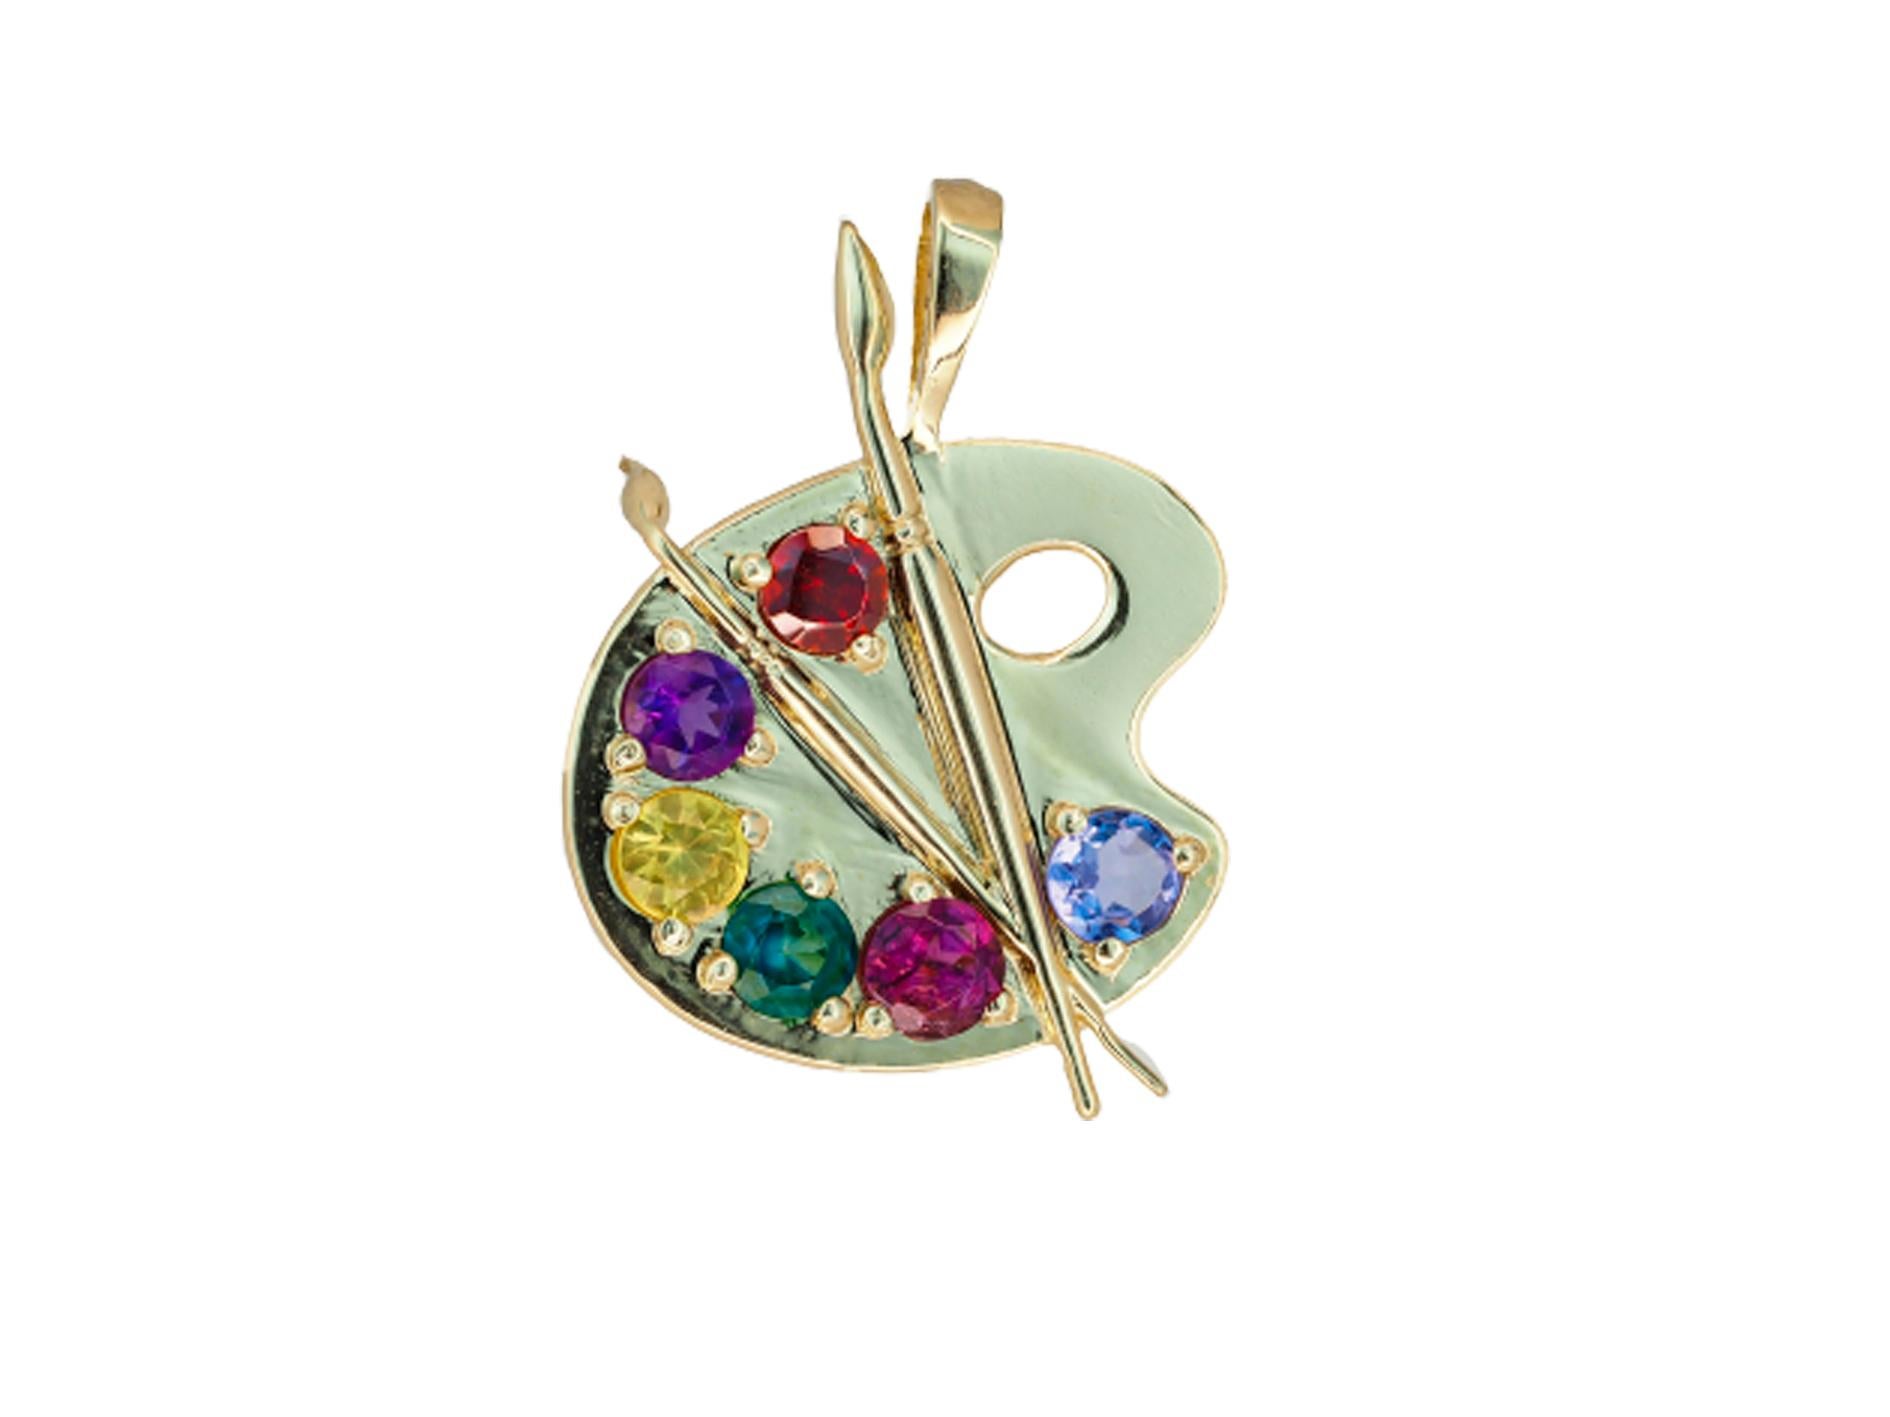 Palette with Paints 14k Gold Pendant with Colored Stones For Sale 8